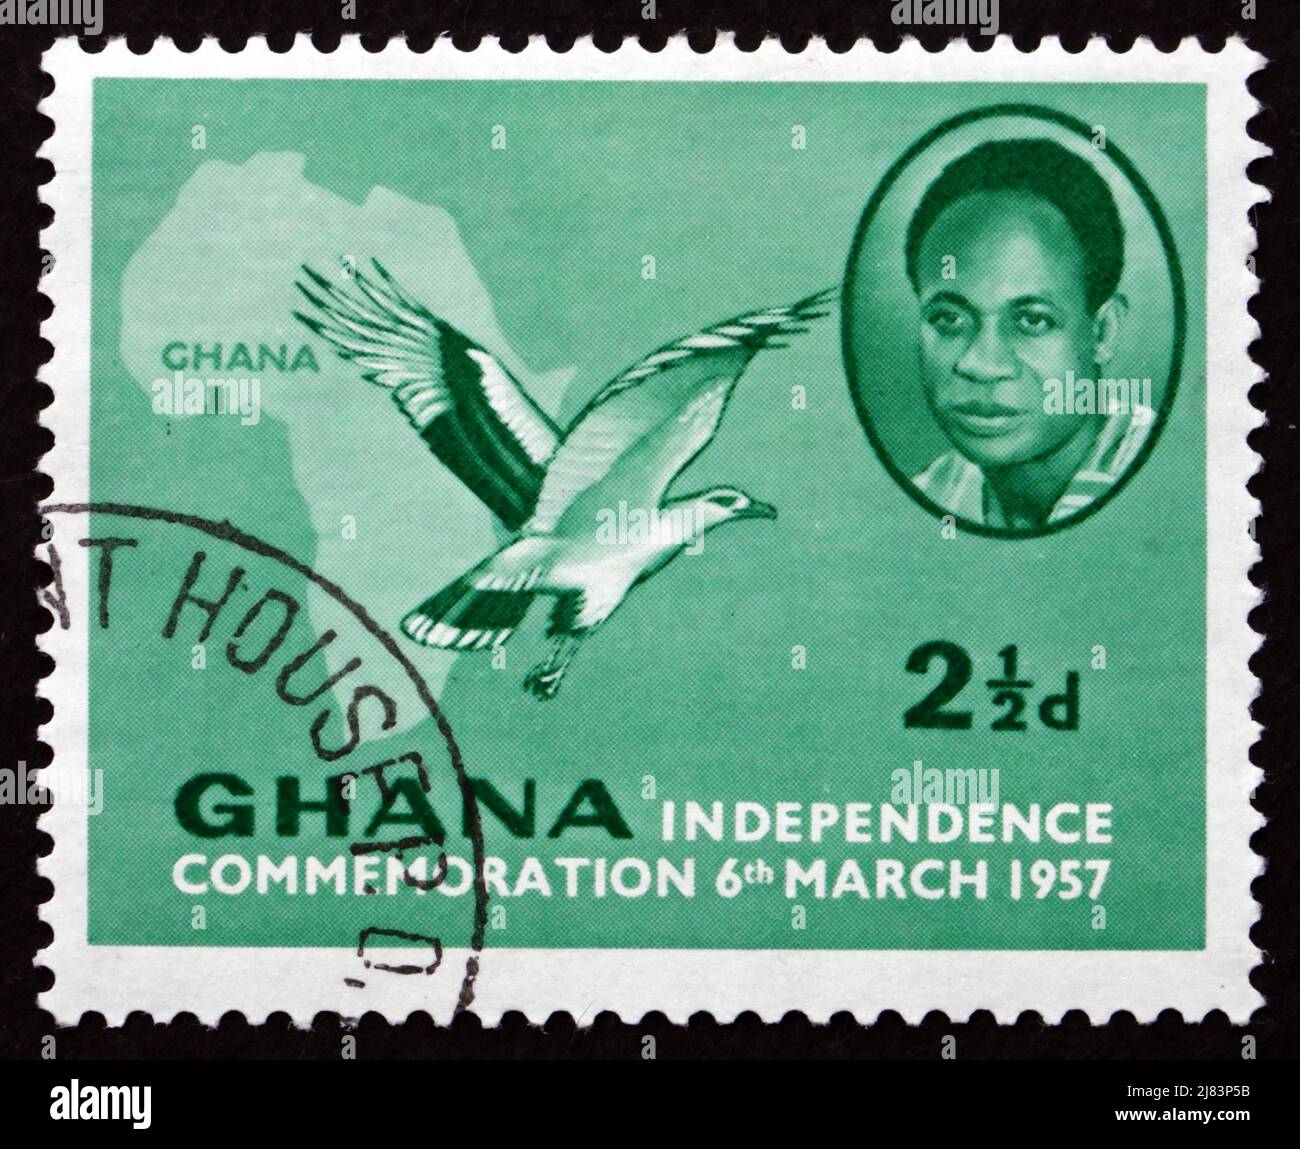 GHANA - CIRCA 1957: a stamp printed in Ghana shows Kwame Nkrumah, the First President of Ghana, Map of Africa and Palm-nut Vulture, circa 1957 Stock Photo